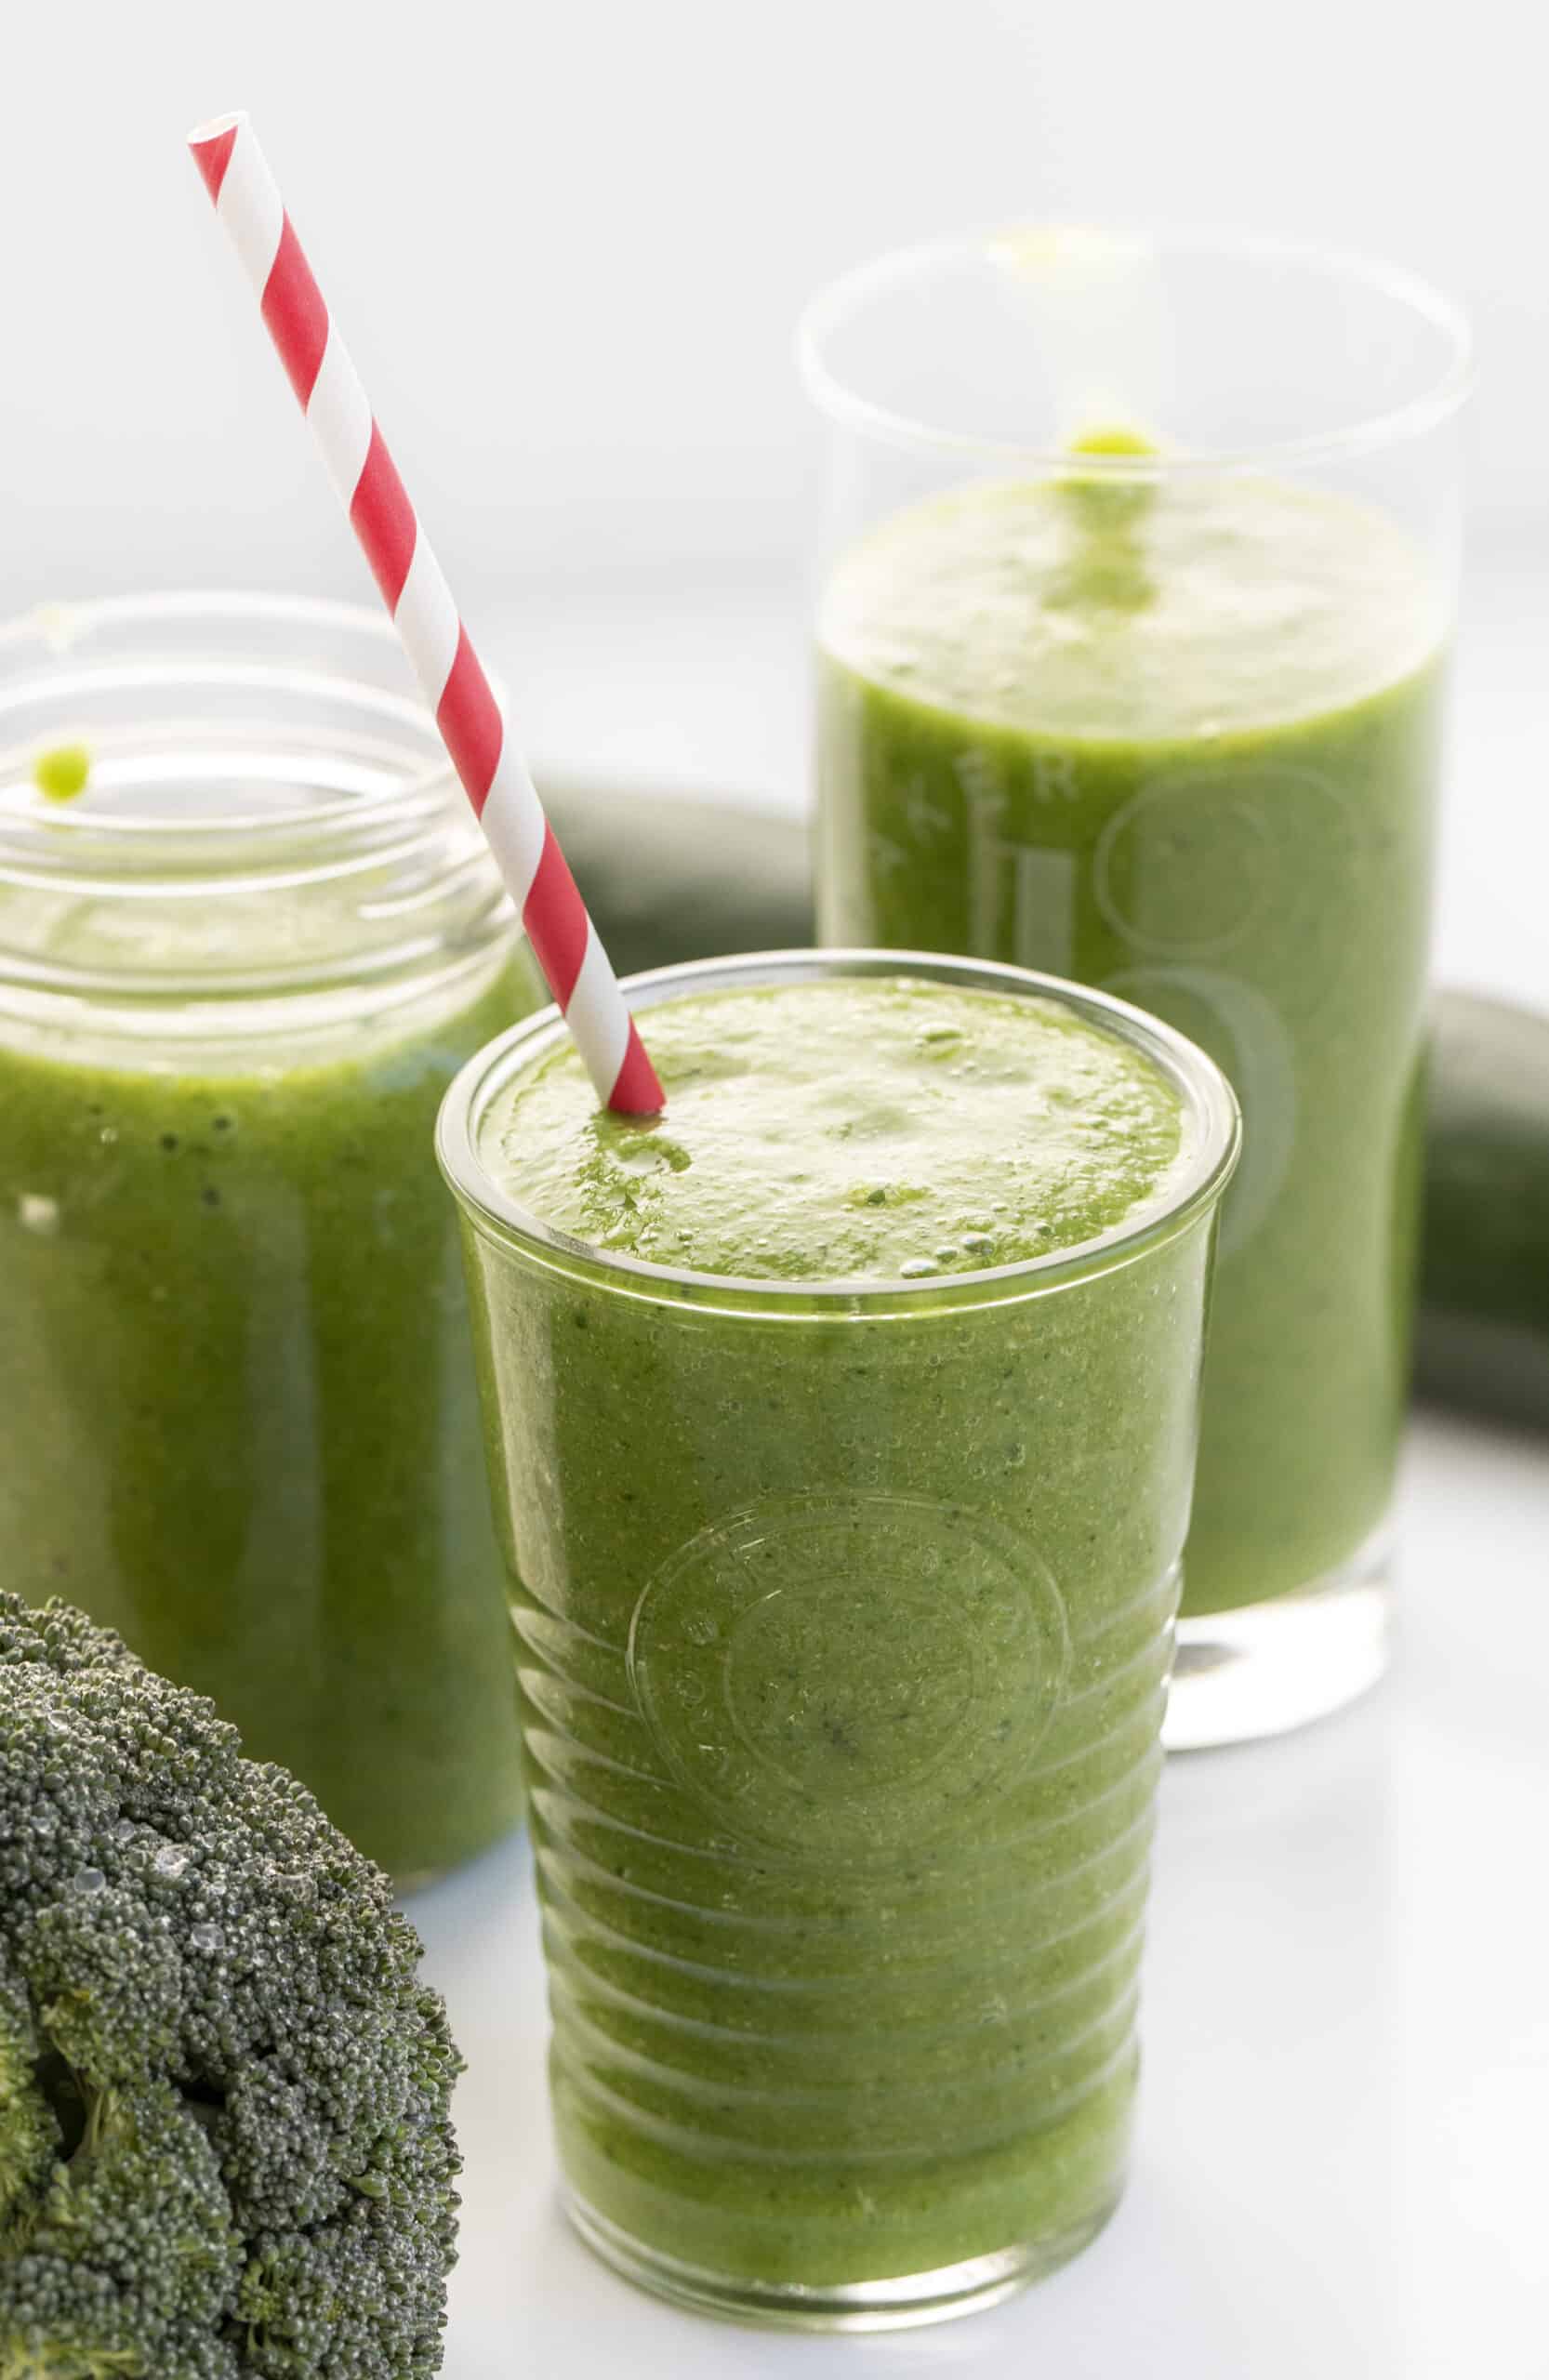 Green Smoothie Recipe in 3 Glasses with Straw